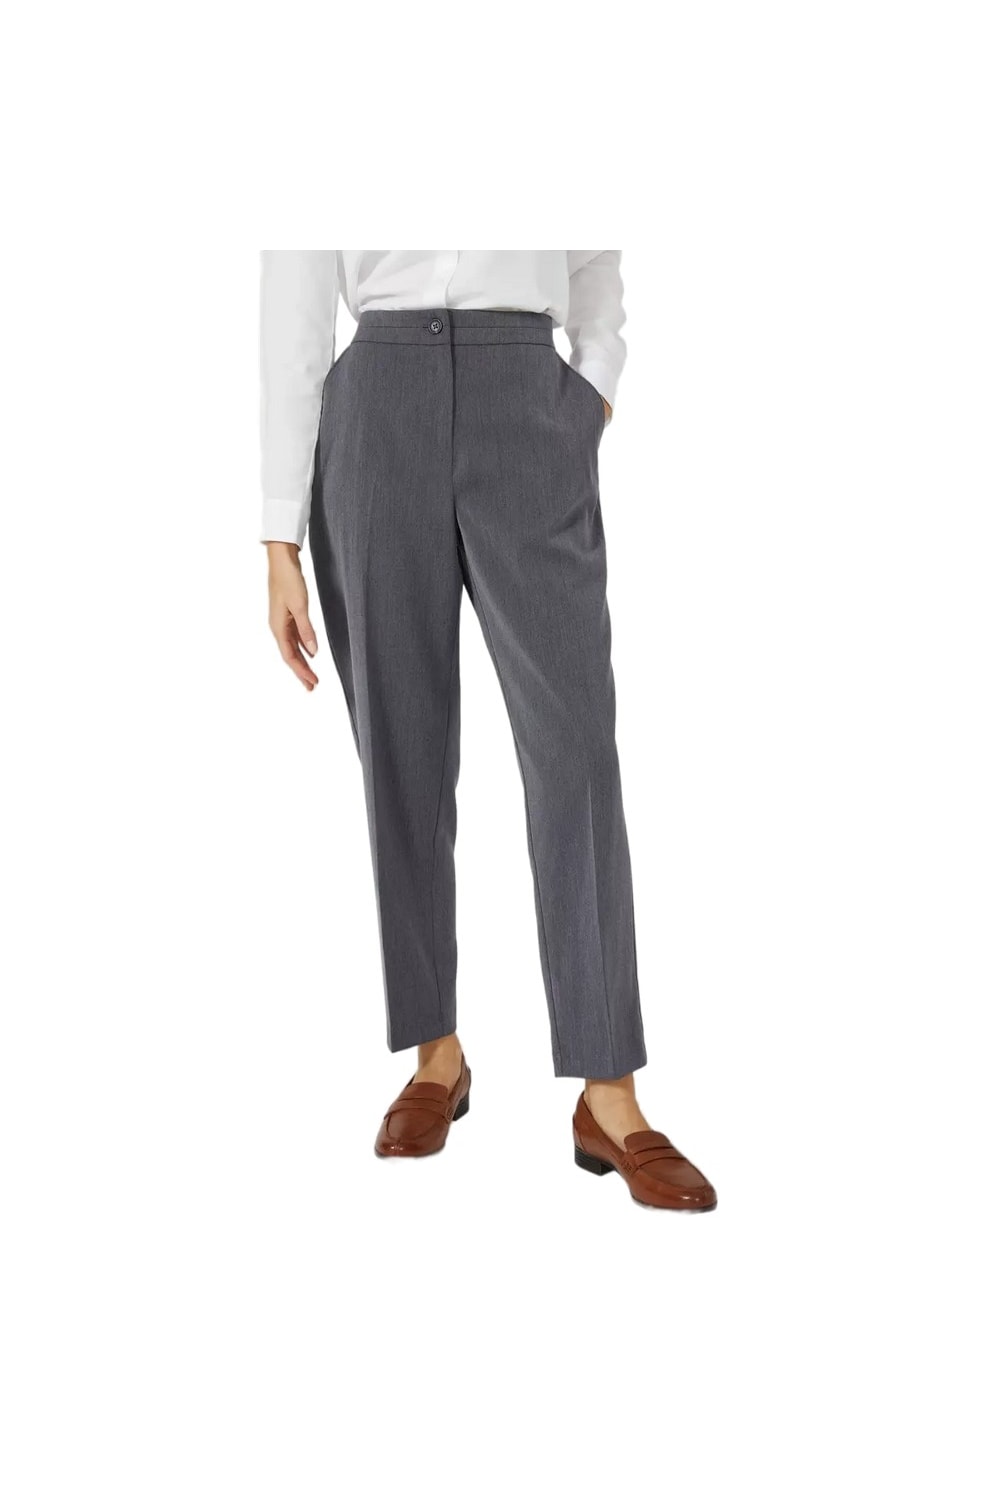 Womens/Ladies Trousers - Gray